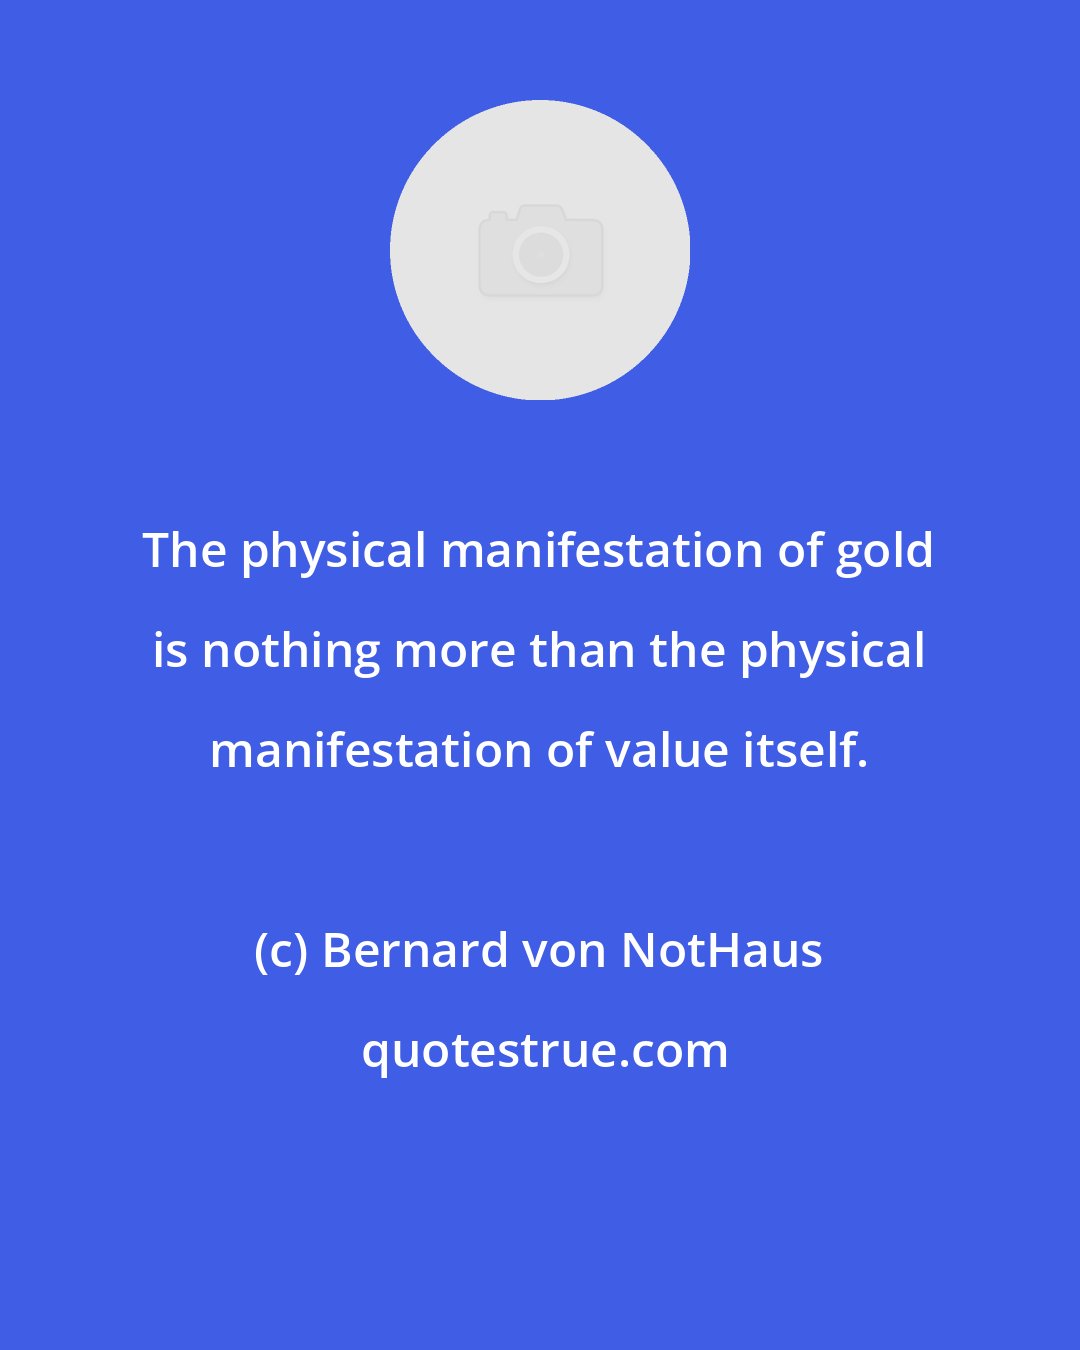 Bernard von NotHaus: The physical manifestation of gold is nothing more than the physical manifestation of value itself.